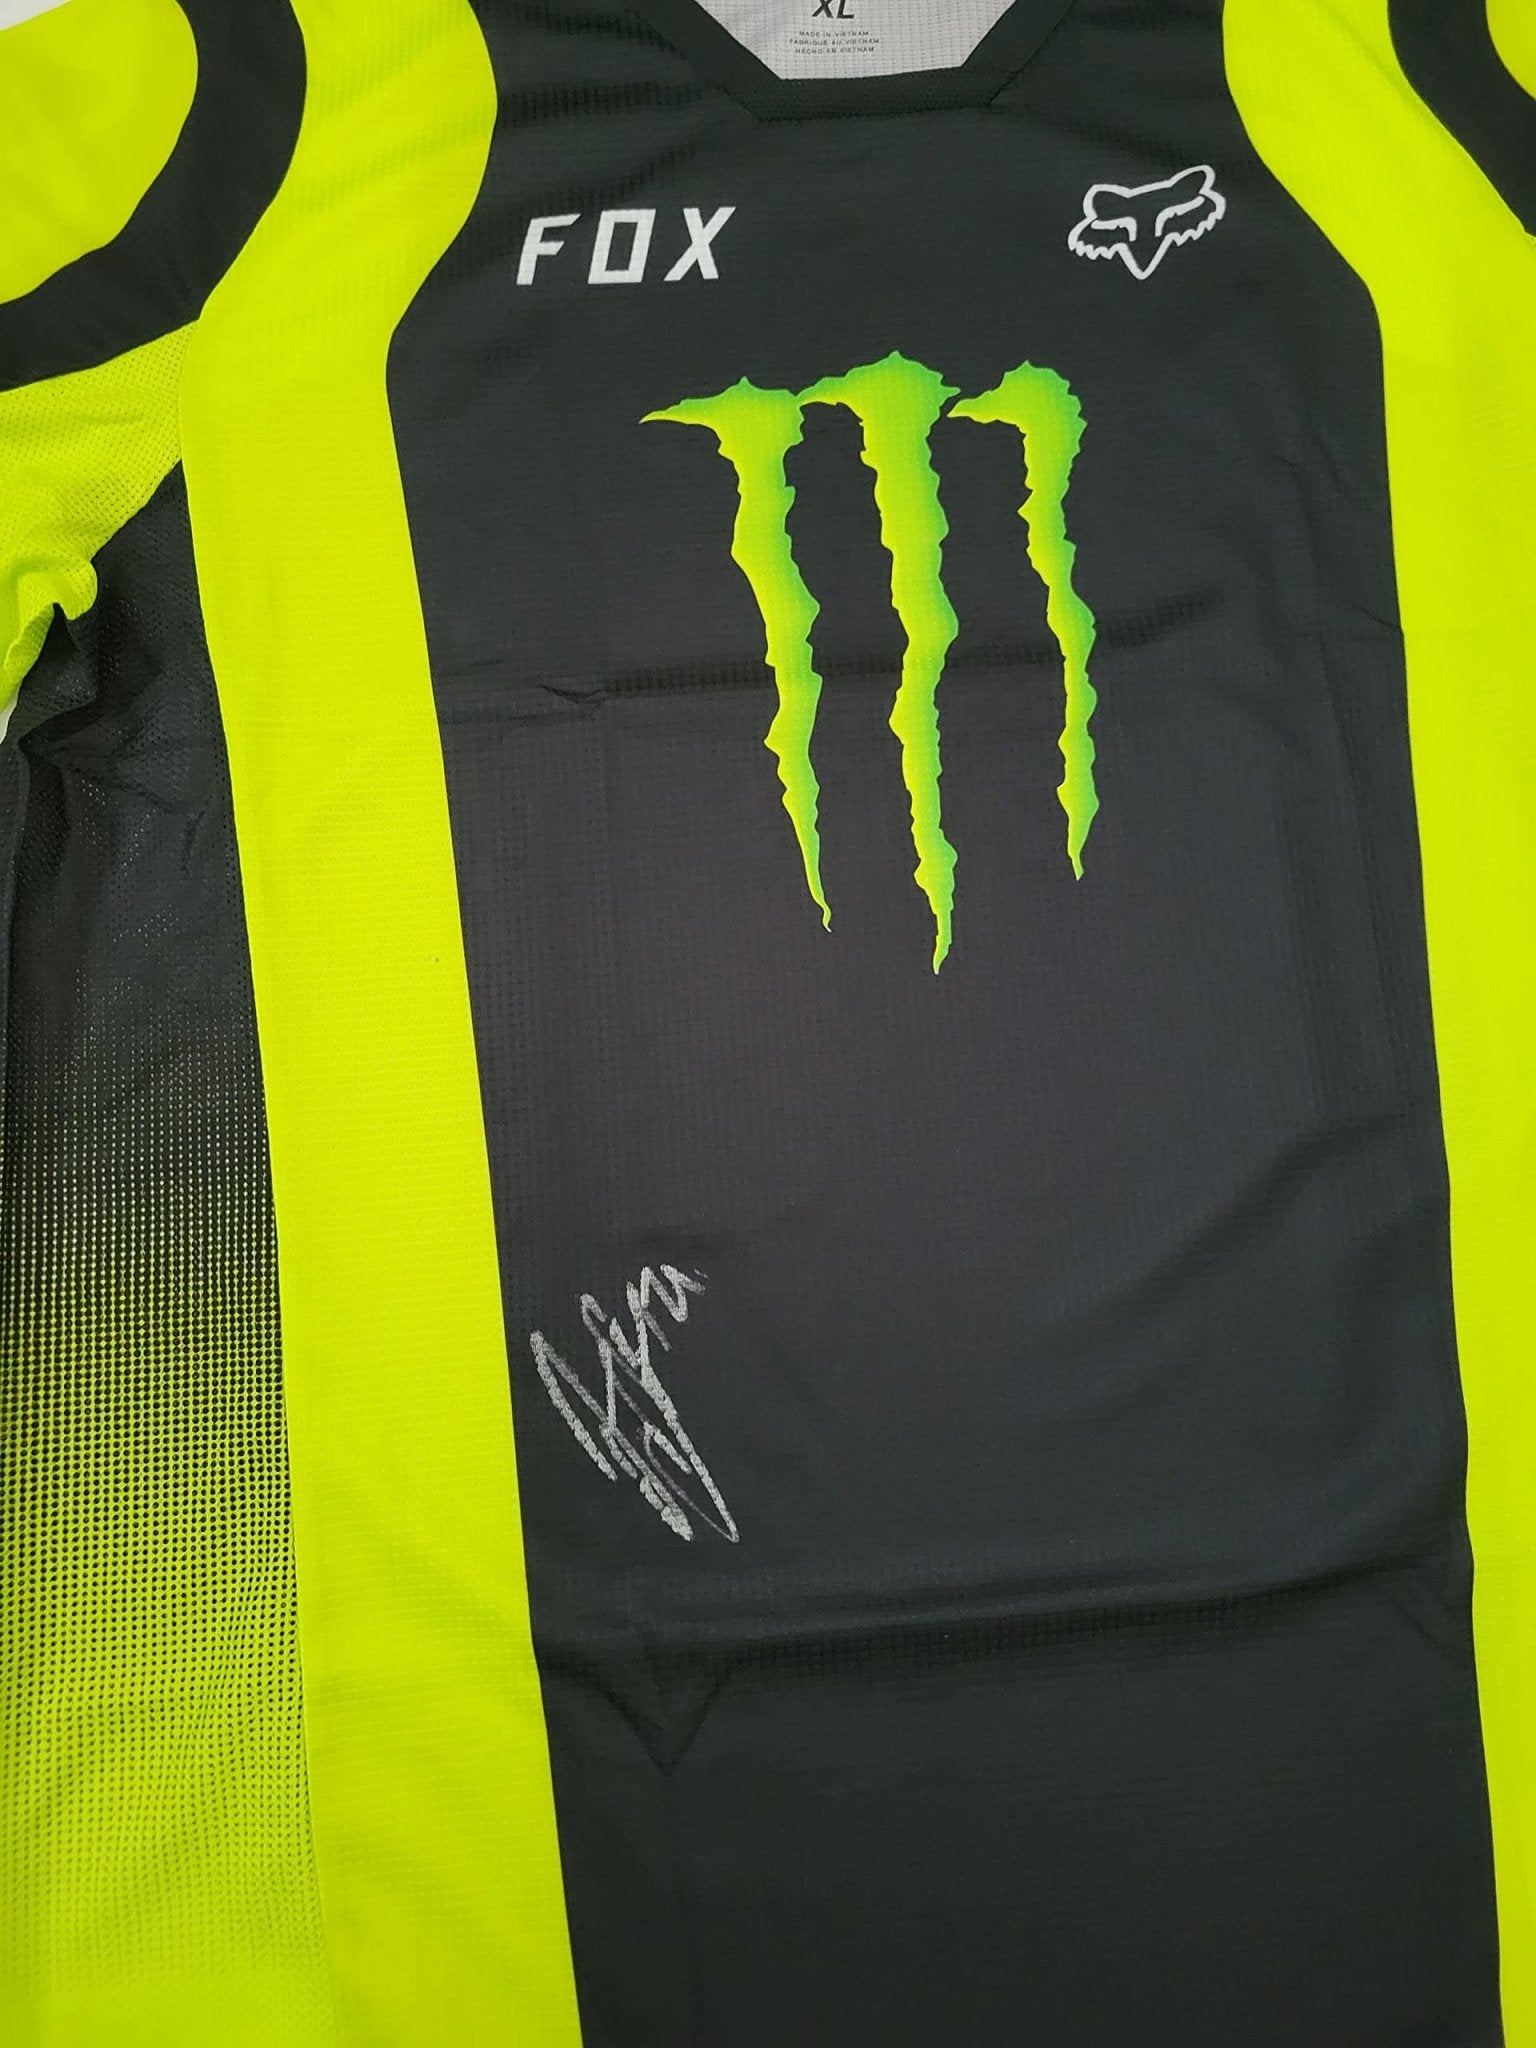 fox signed jersey